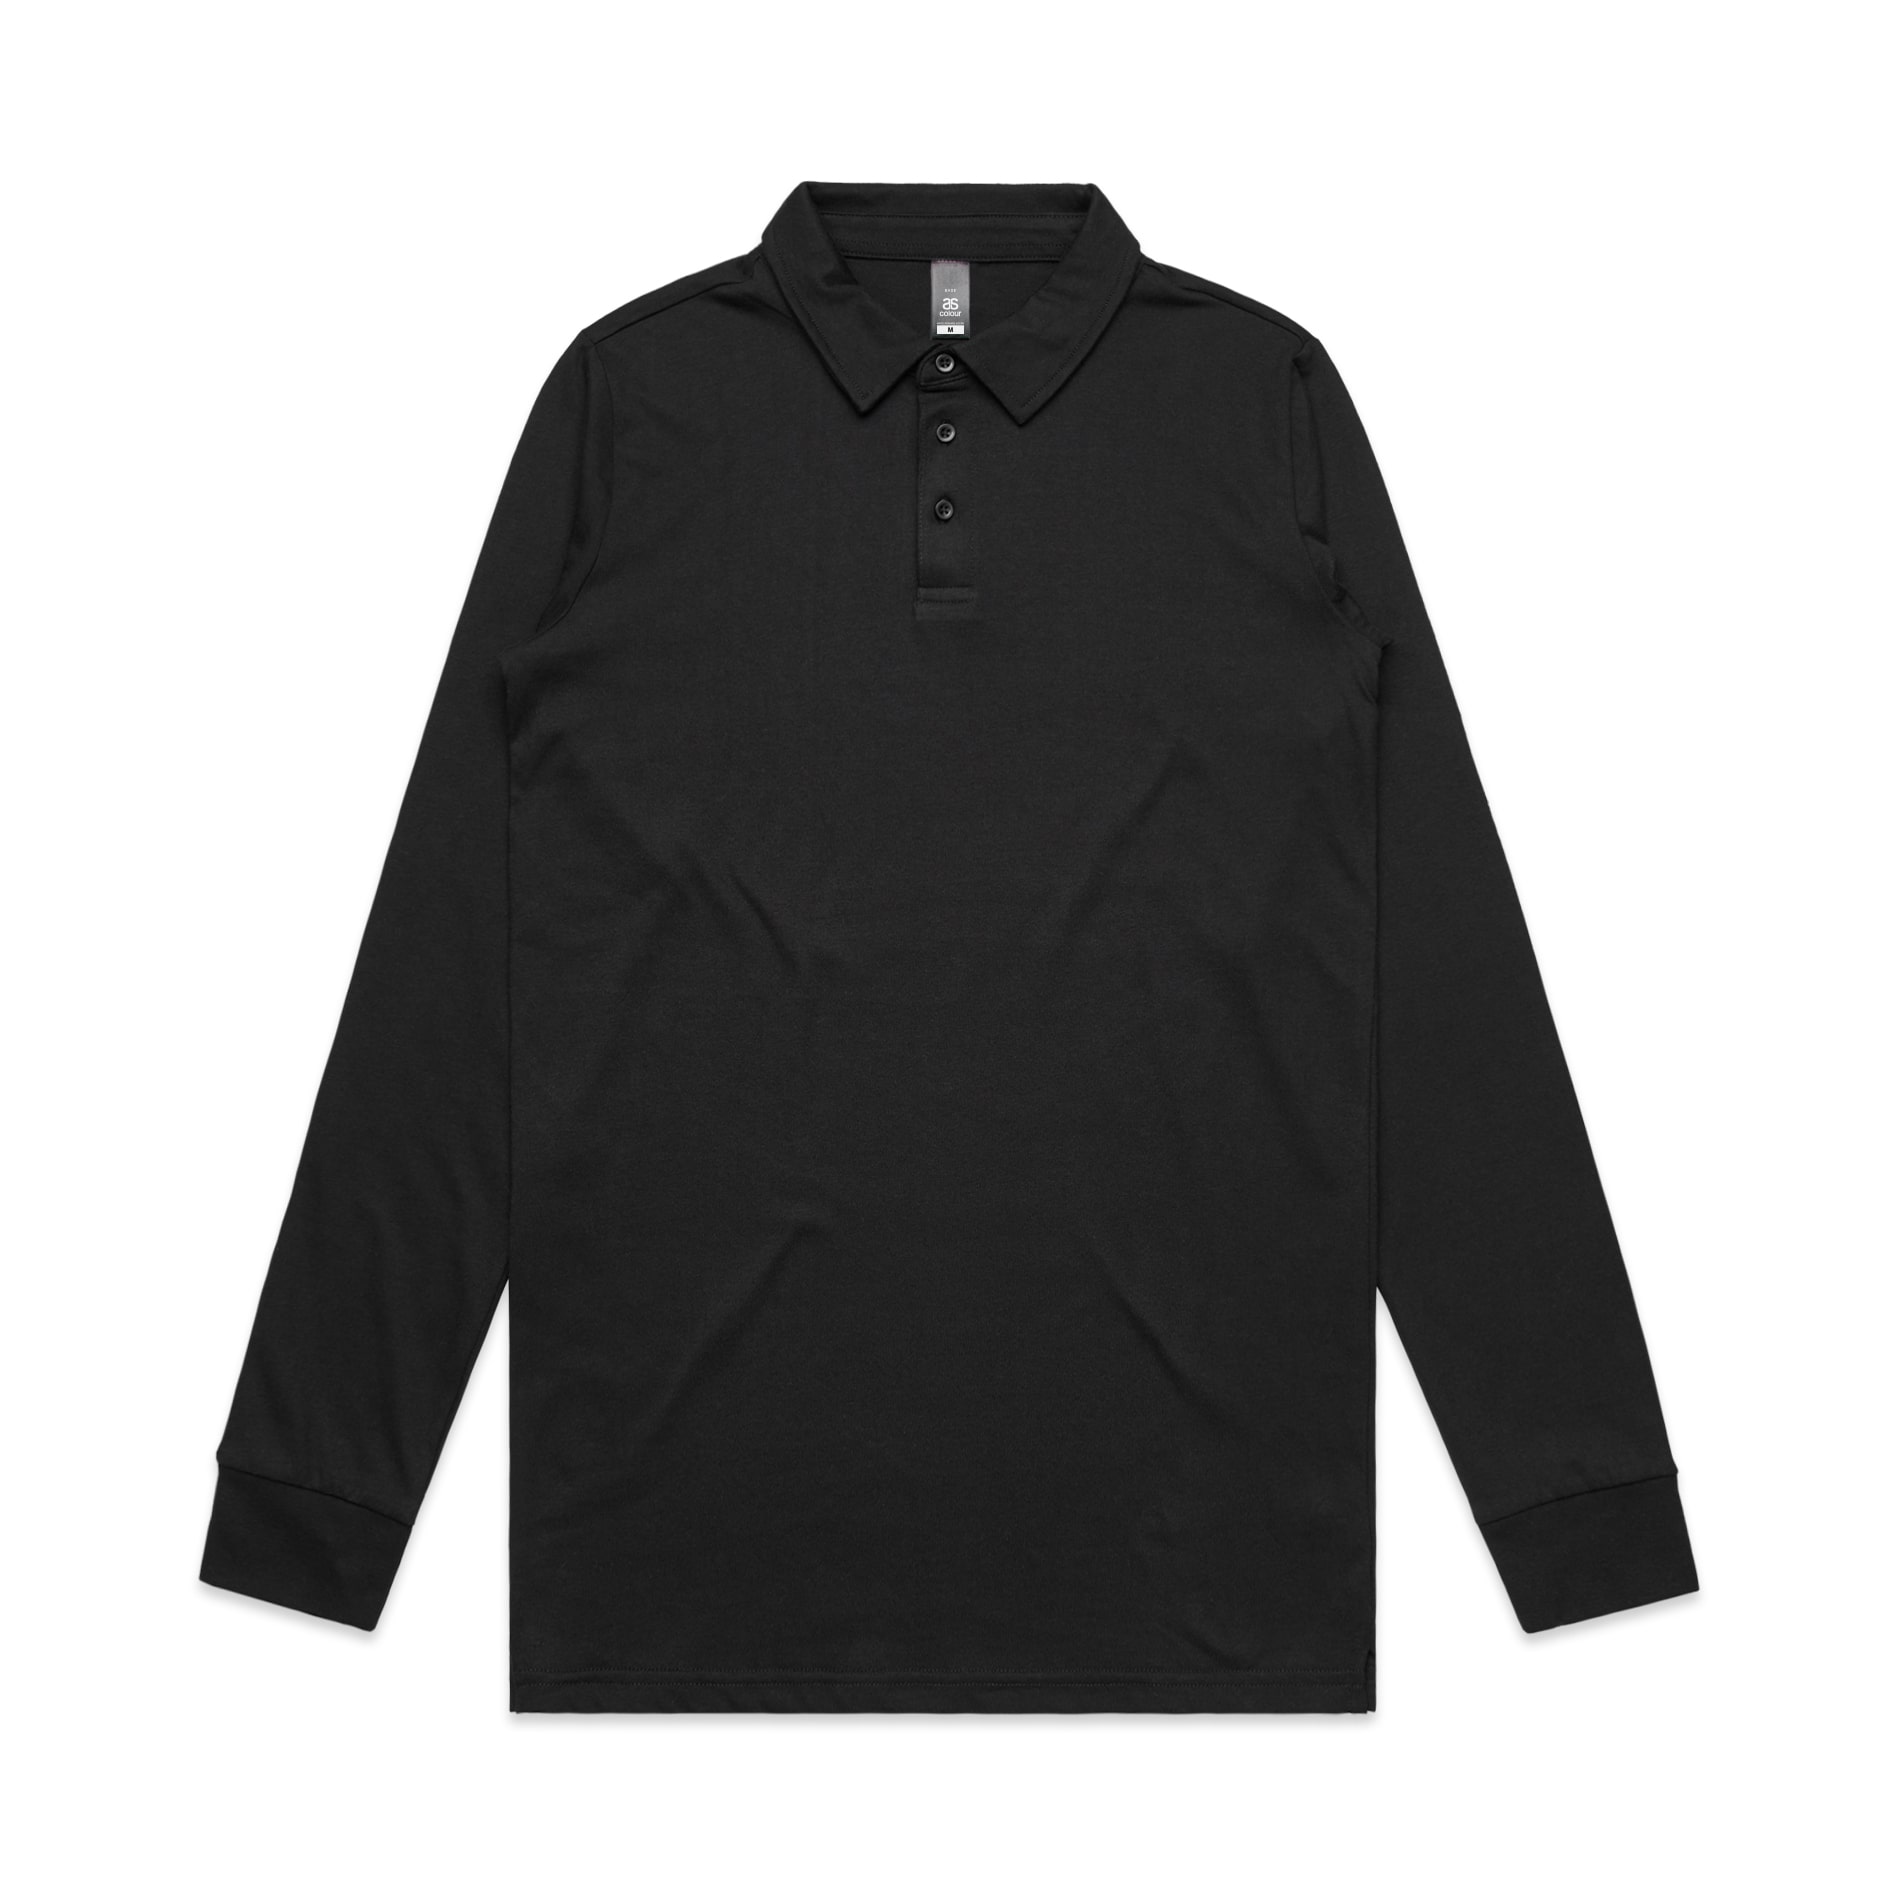 5 best polo shirts to personalise - 5404 chad ls polo black